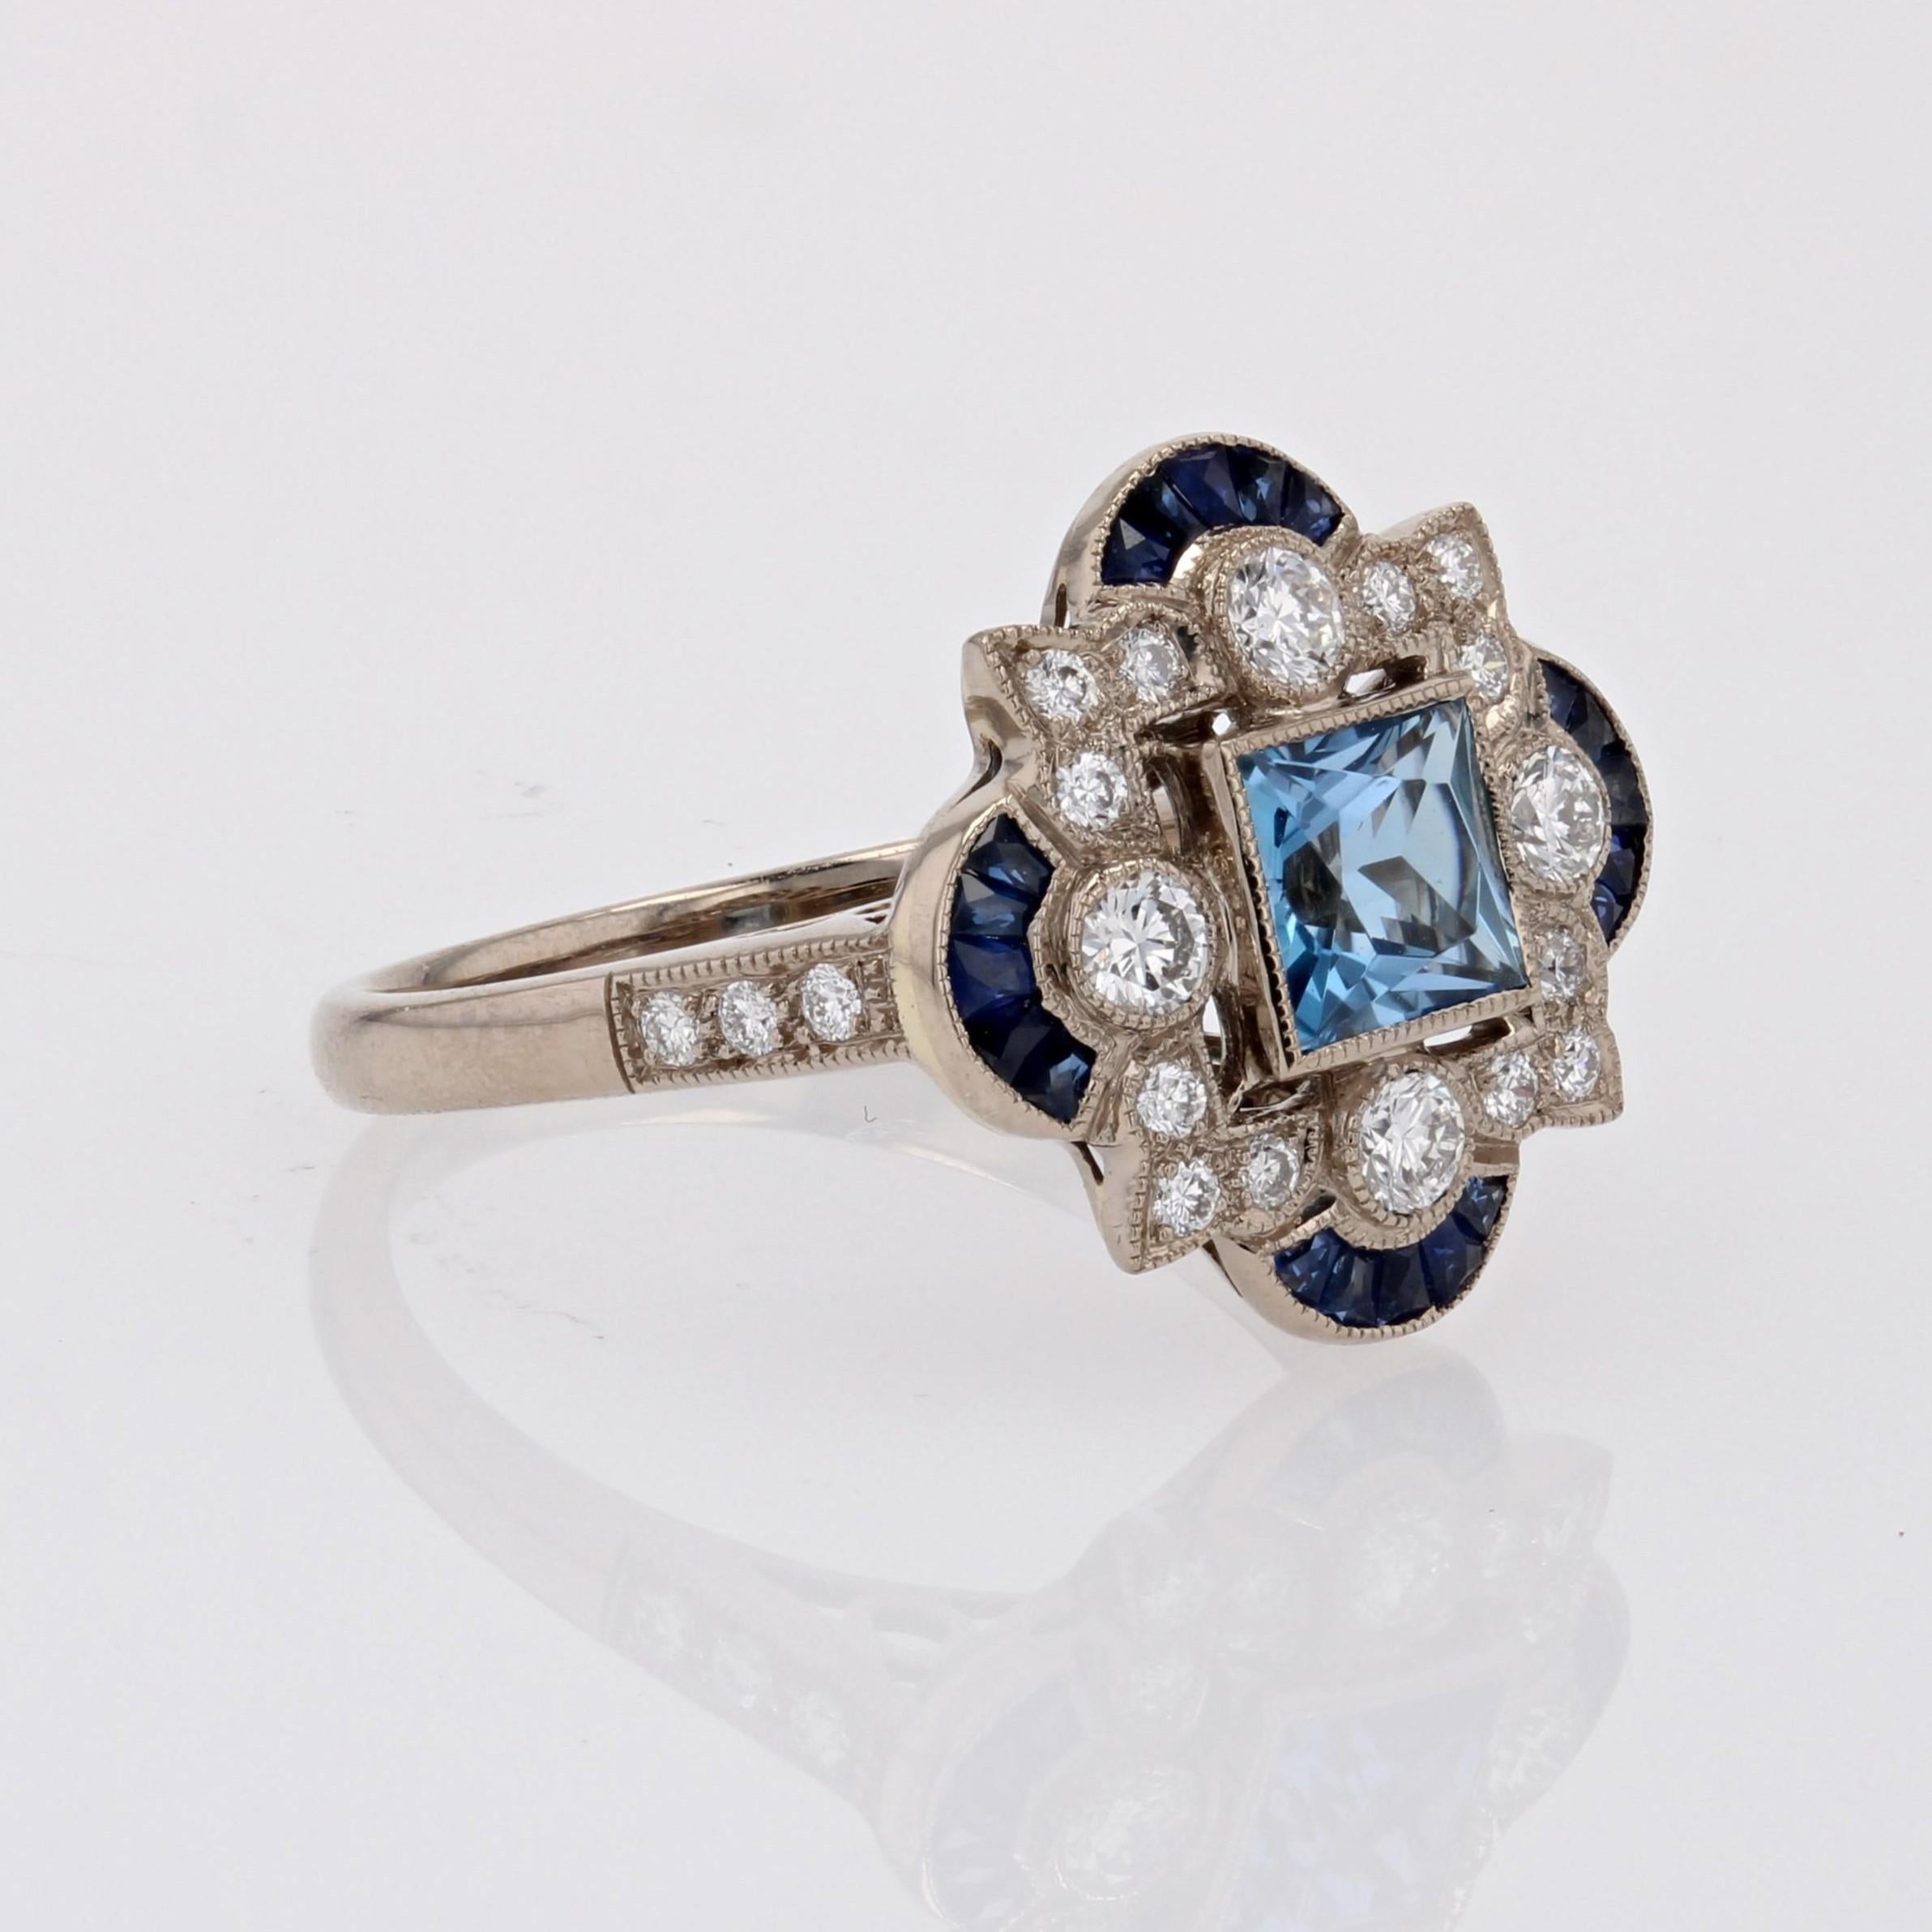 New Art Deco Style Aquamarine Calibrated Sapphires Diamonds 18K White Gold Ring For Sale 5